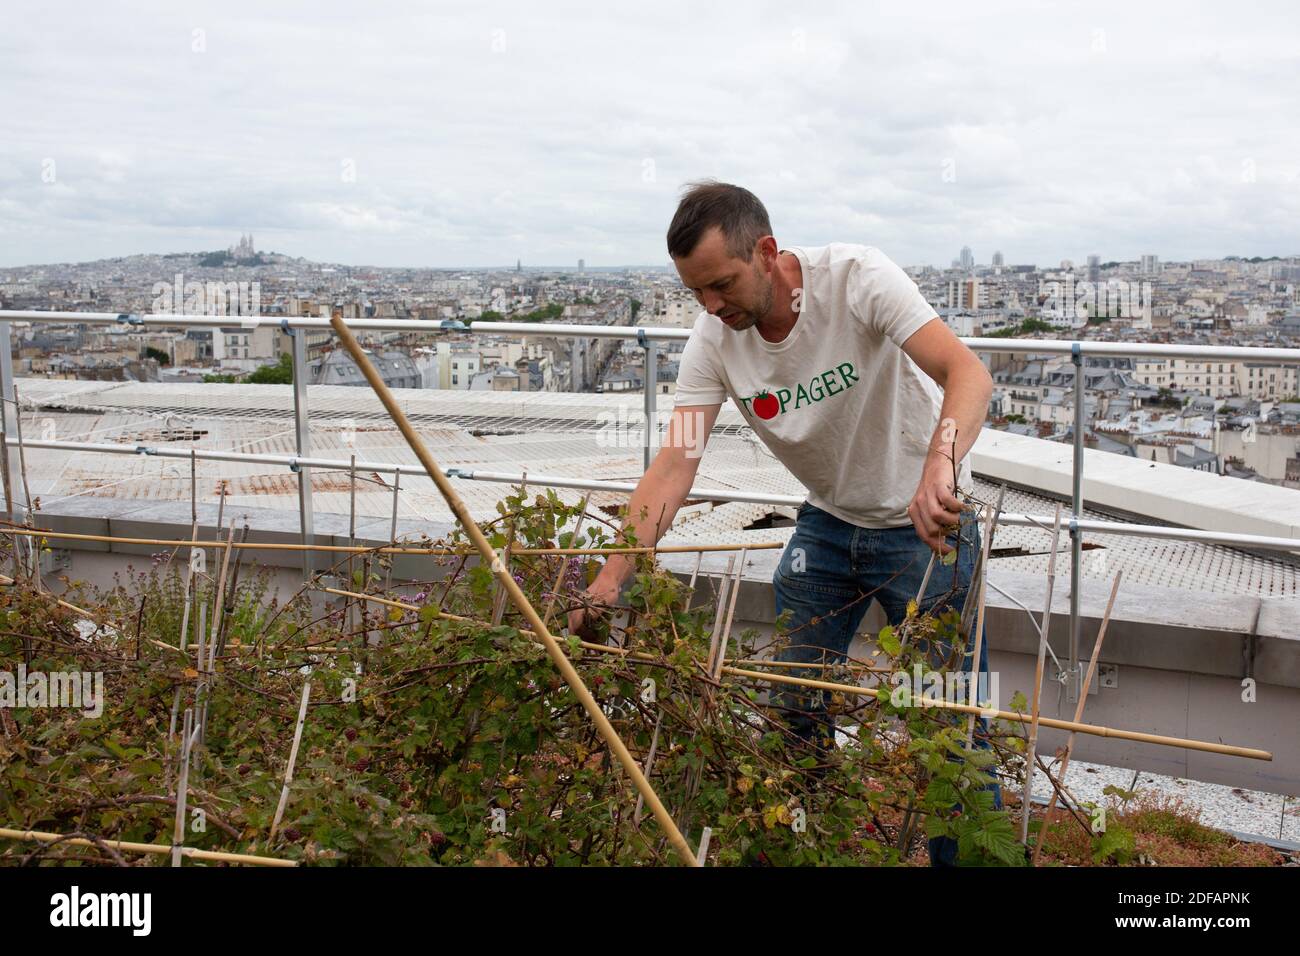 Staff of the company Topager works to harvest fruits and vegetables on the shared gardens on the roof of the Opera Bastille, where the roofs of Paris are visible. The team is composed of gardener and landscaper. On June 9, 2020 in Paris, France. Photo by Raphael Lafargue/ABACAPRESS.COM Projet d’Agriculture Urbaine Opéra 4 Saisons porté par Topager sur les toits de l’Opéra Bastille Stock Photo